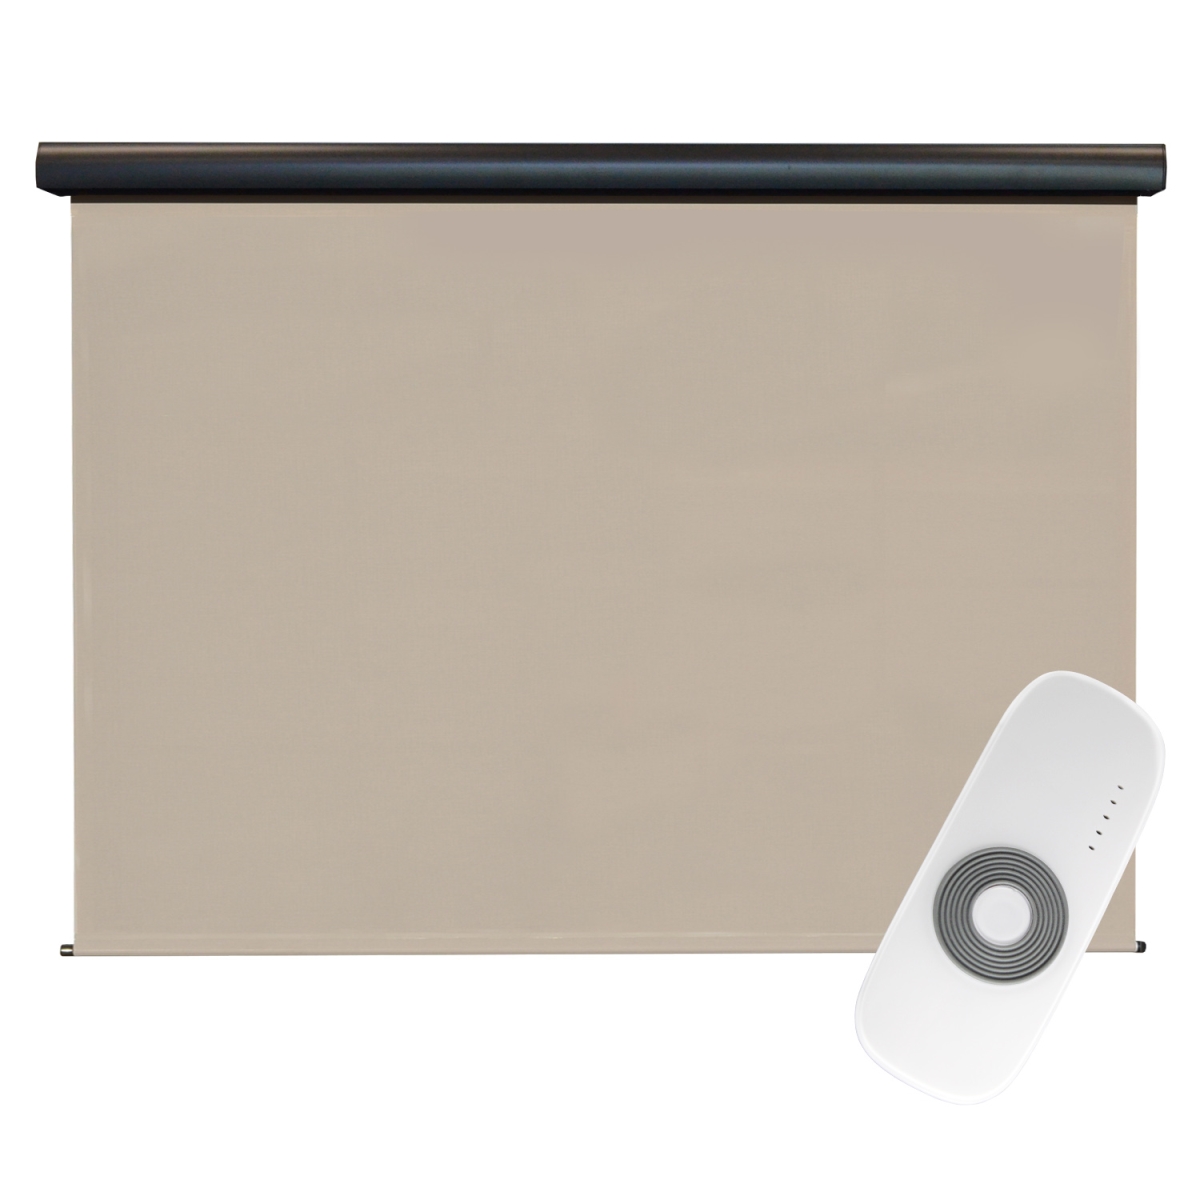 O80.48.80 4 X 8 Ft. Regal Rechargeable Motorized Outdoor Sun Shade With Protective Valance - Maple White